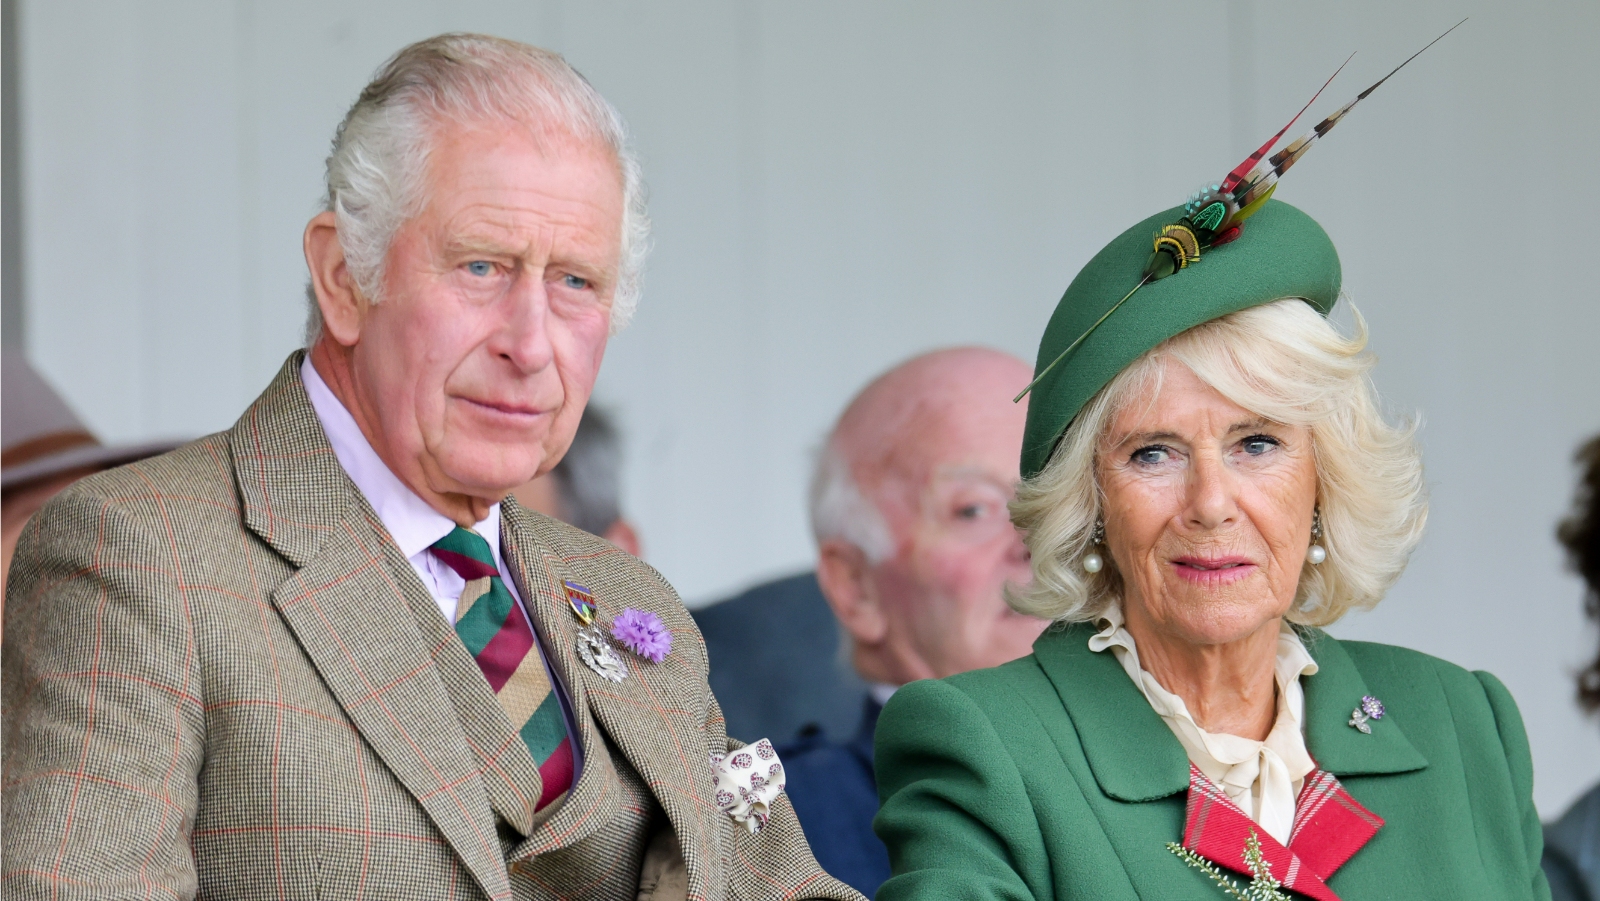 King Charles III and Camilla, who will be crowned Queen Consort